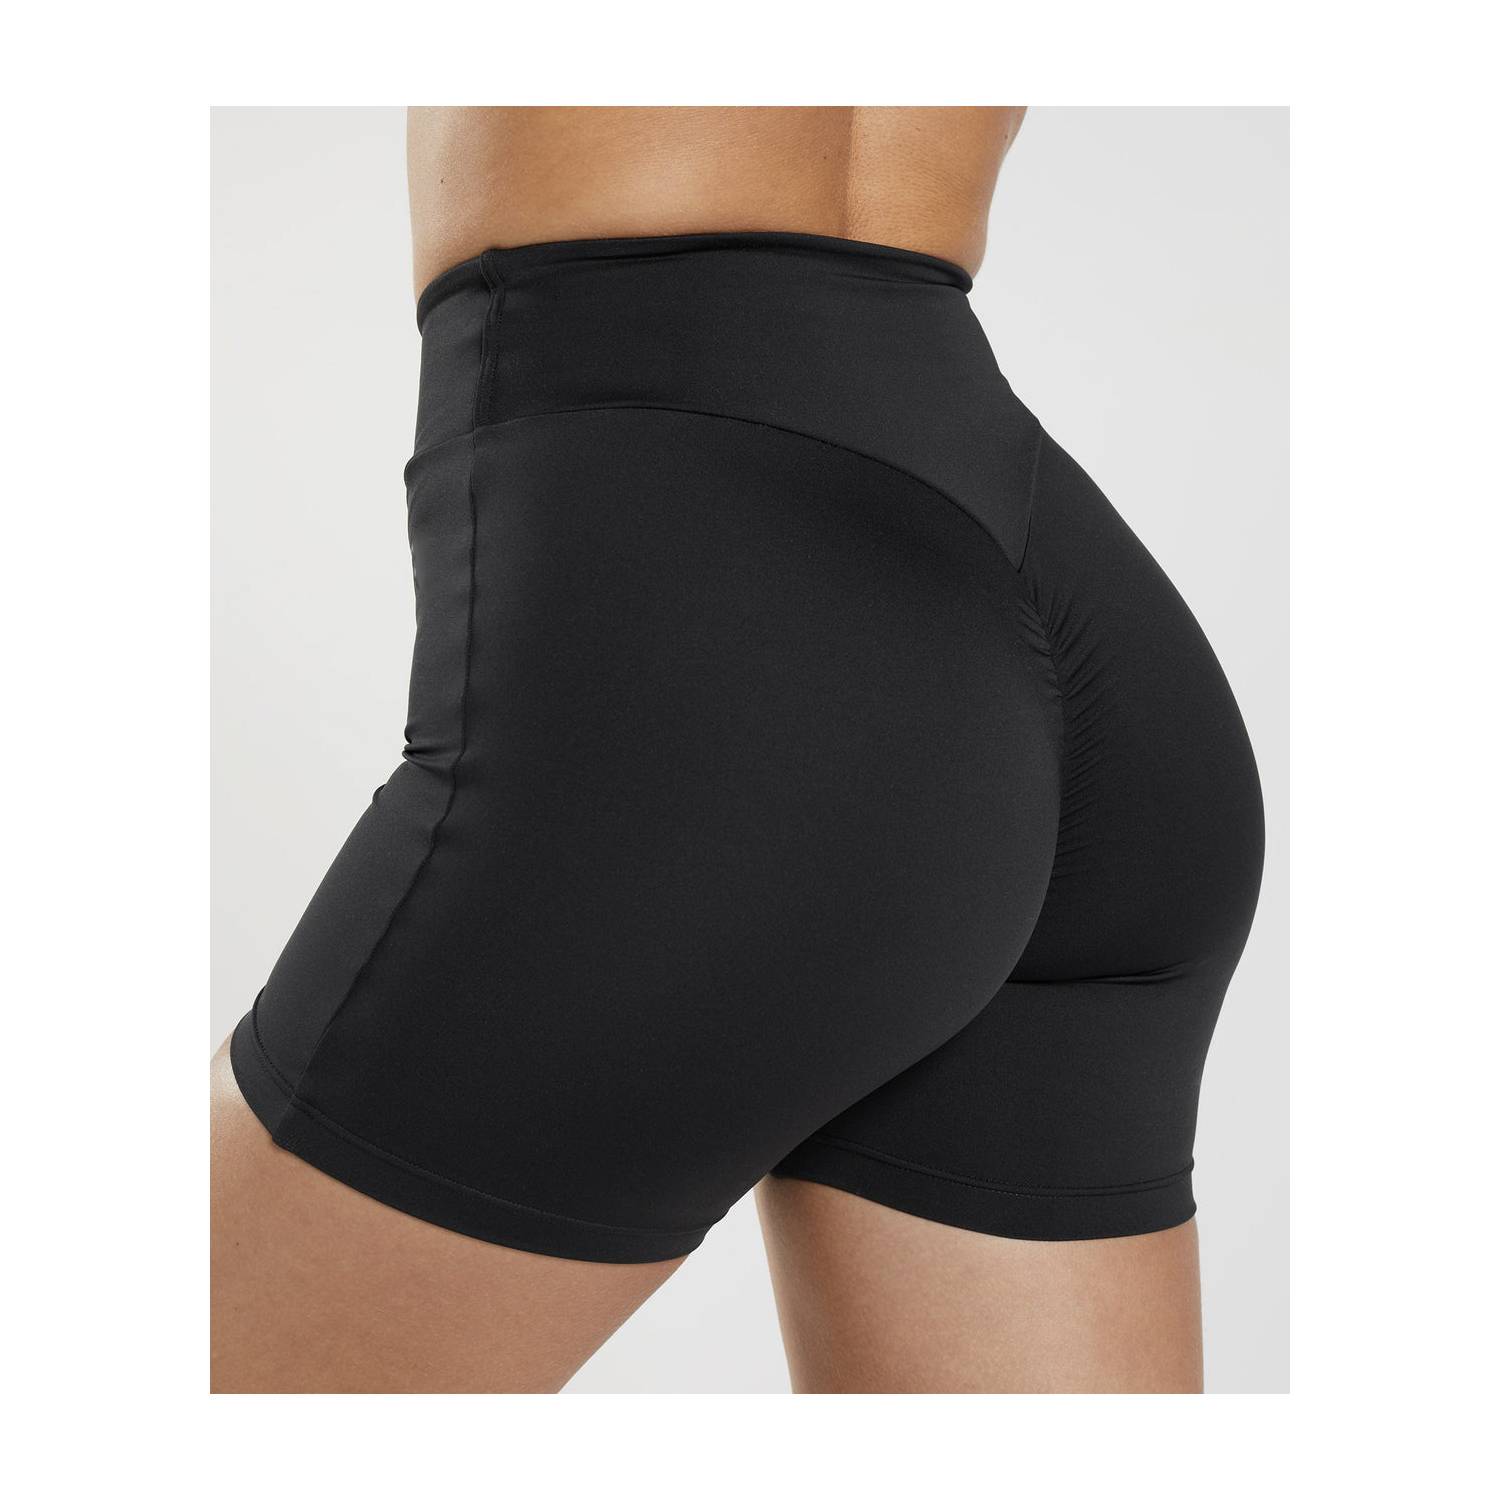 Shorts Push Up Mujer - Short con Scrunch - Ropa deportiva gym ALPHA FIT